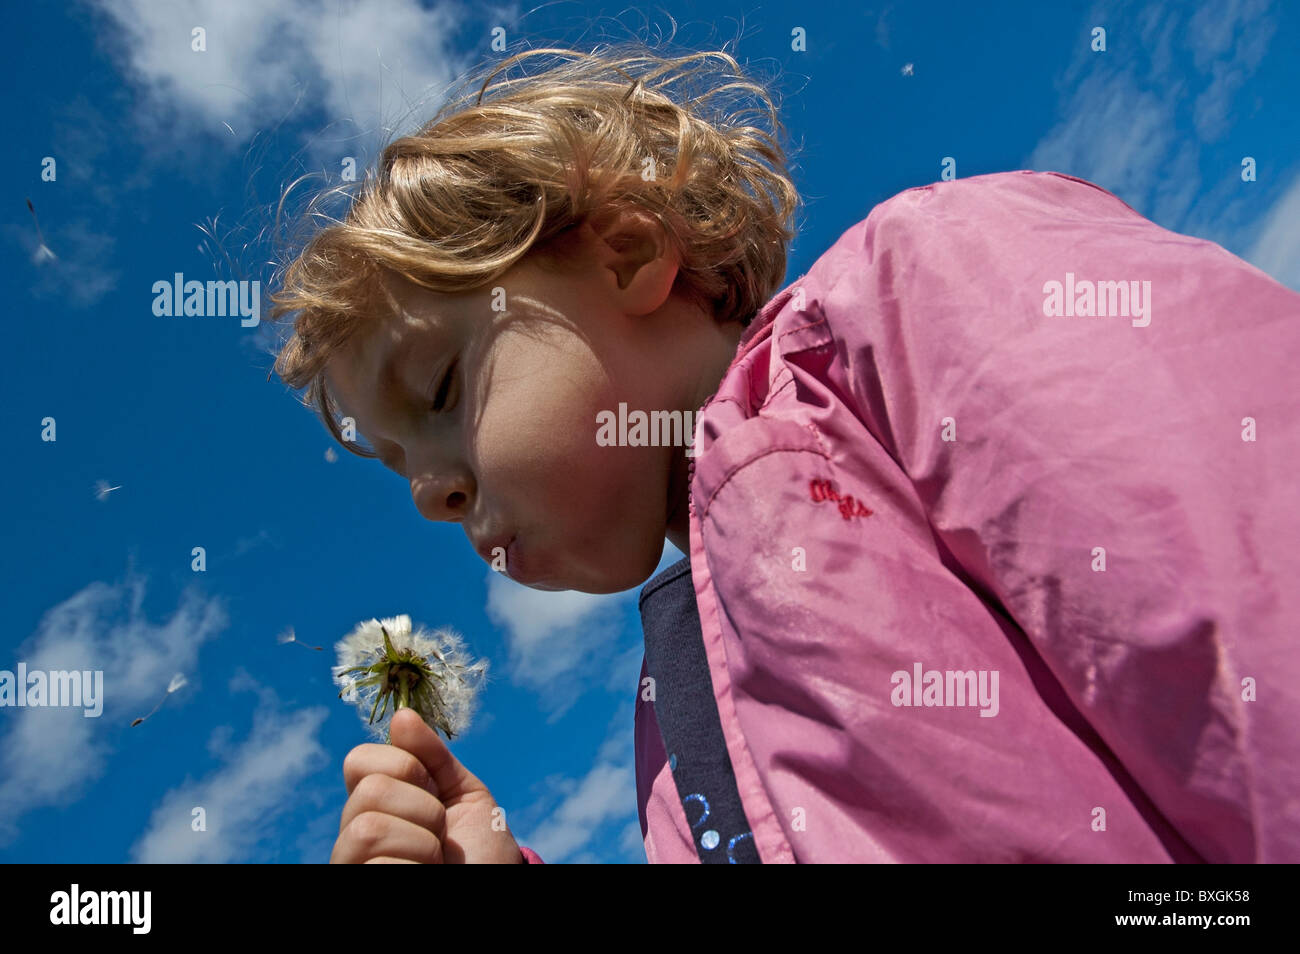 Child with dandelion - Little girl blowing the seeds from a dandelion flower outdoors Stock Photo